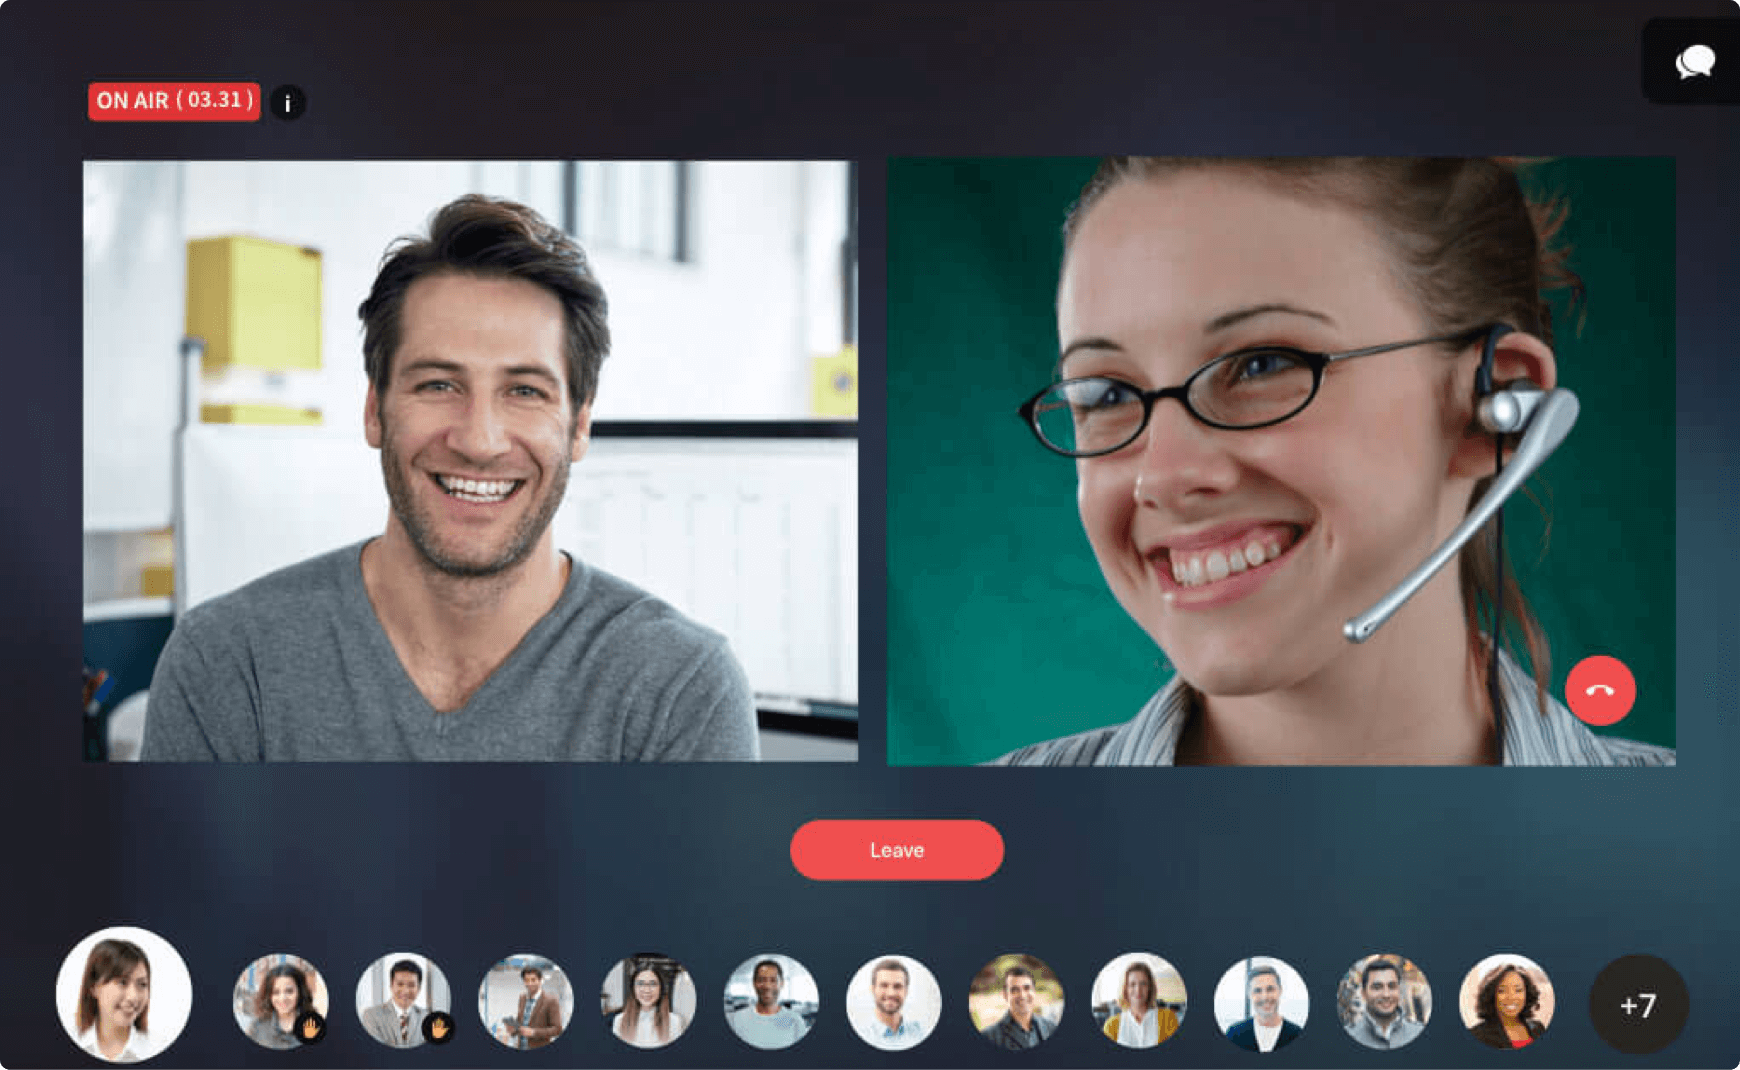 Experience smooth, hassle-free video calls between two live speakers anytim...